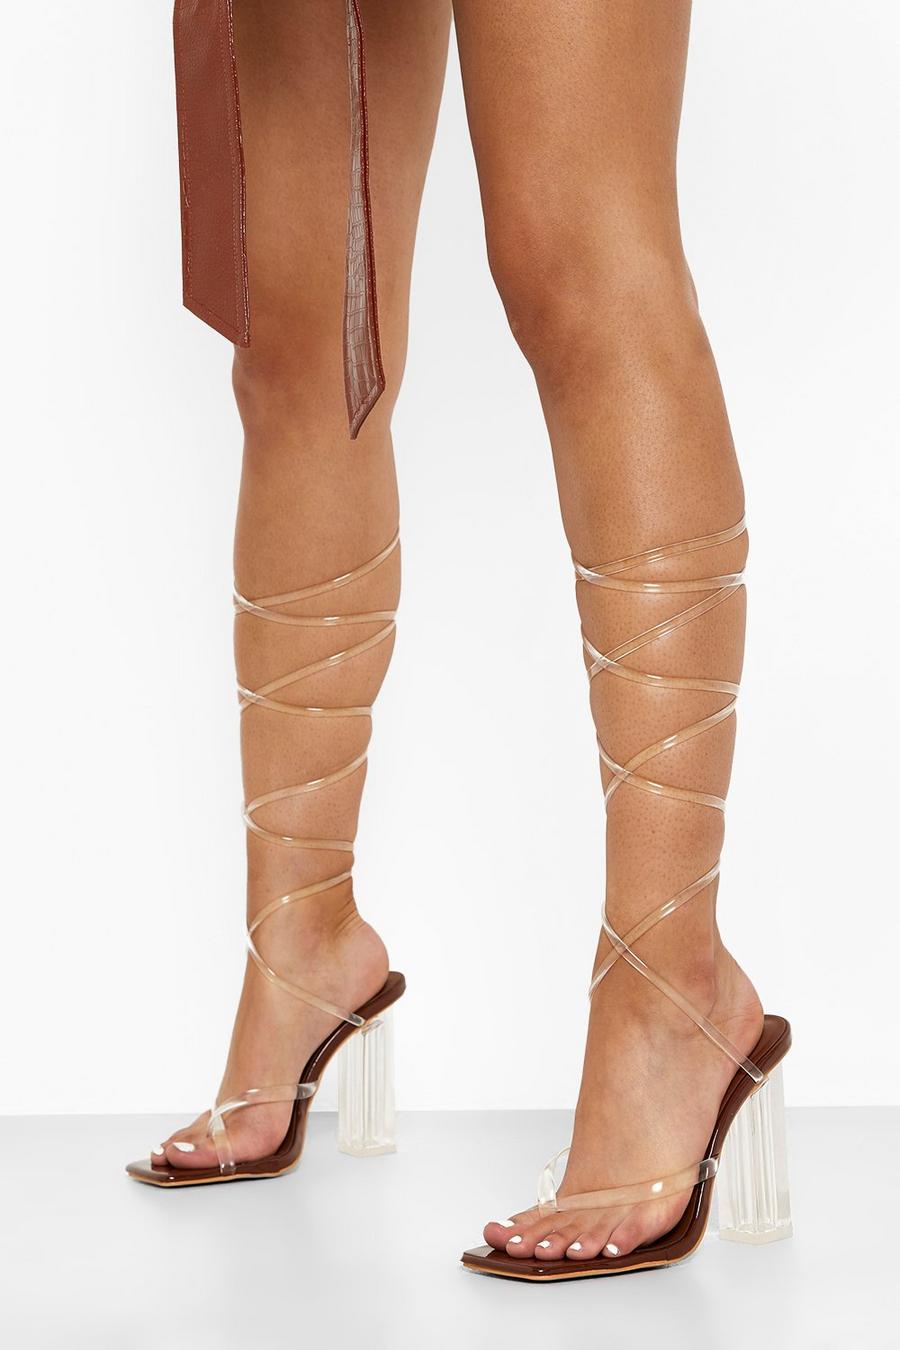 Chocolate brown Clear Patent Strappy Heels